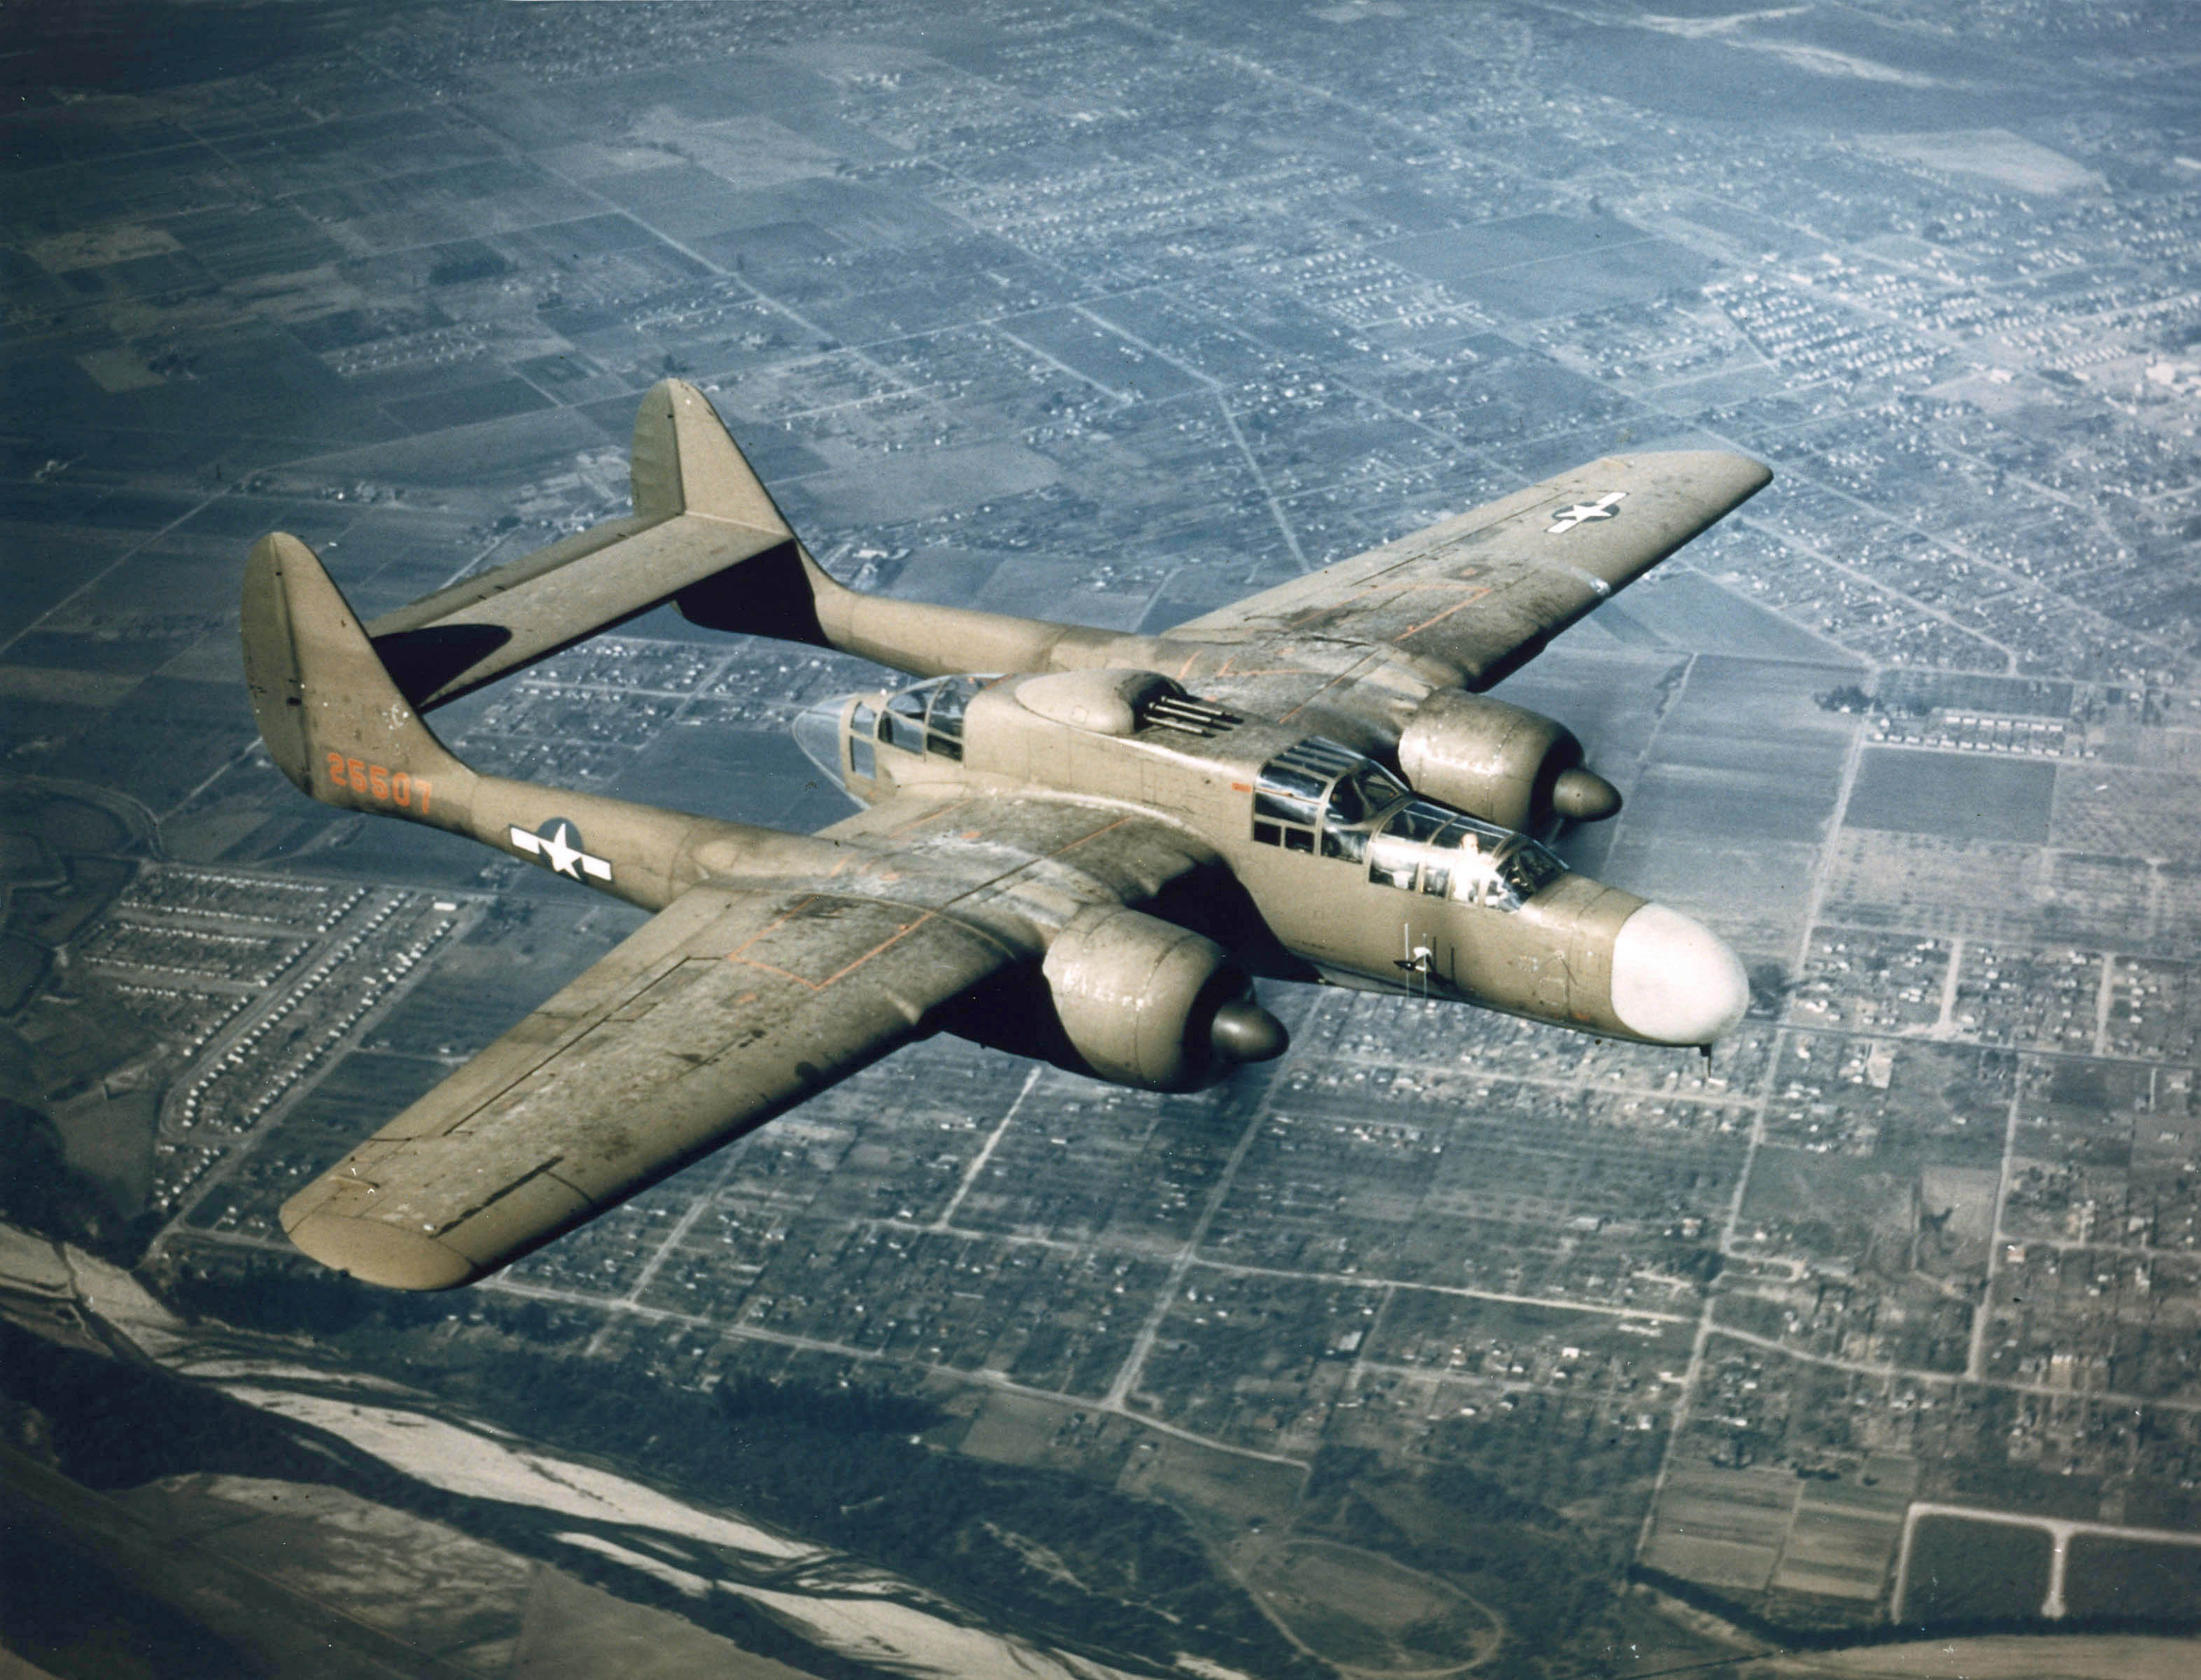 Northrop P-61A-1-NO Black Widow 42-5507 in olive green camouflage. (U.S. Air Force)